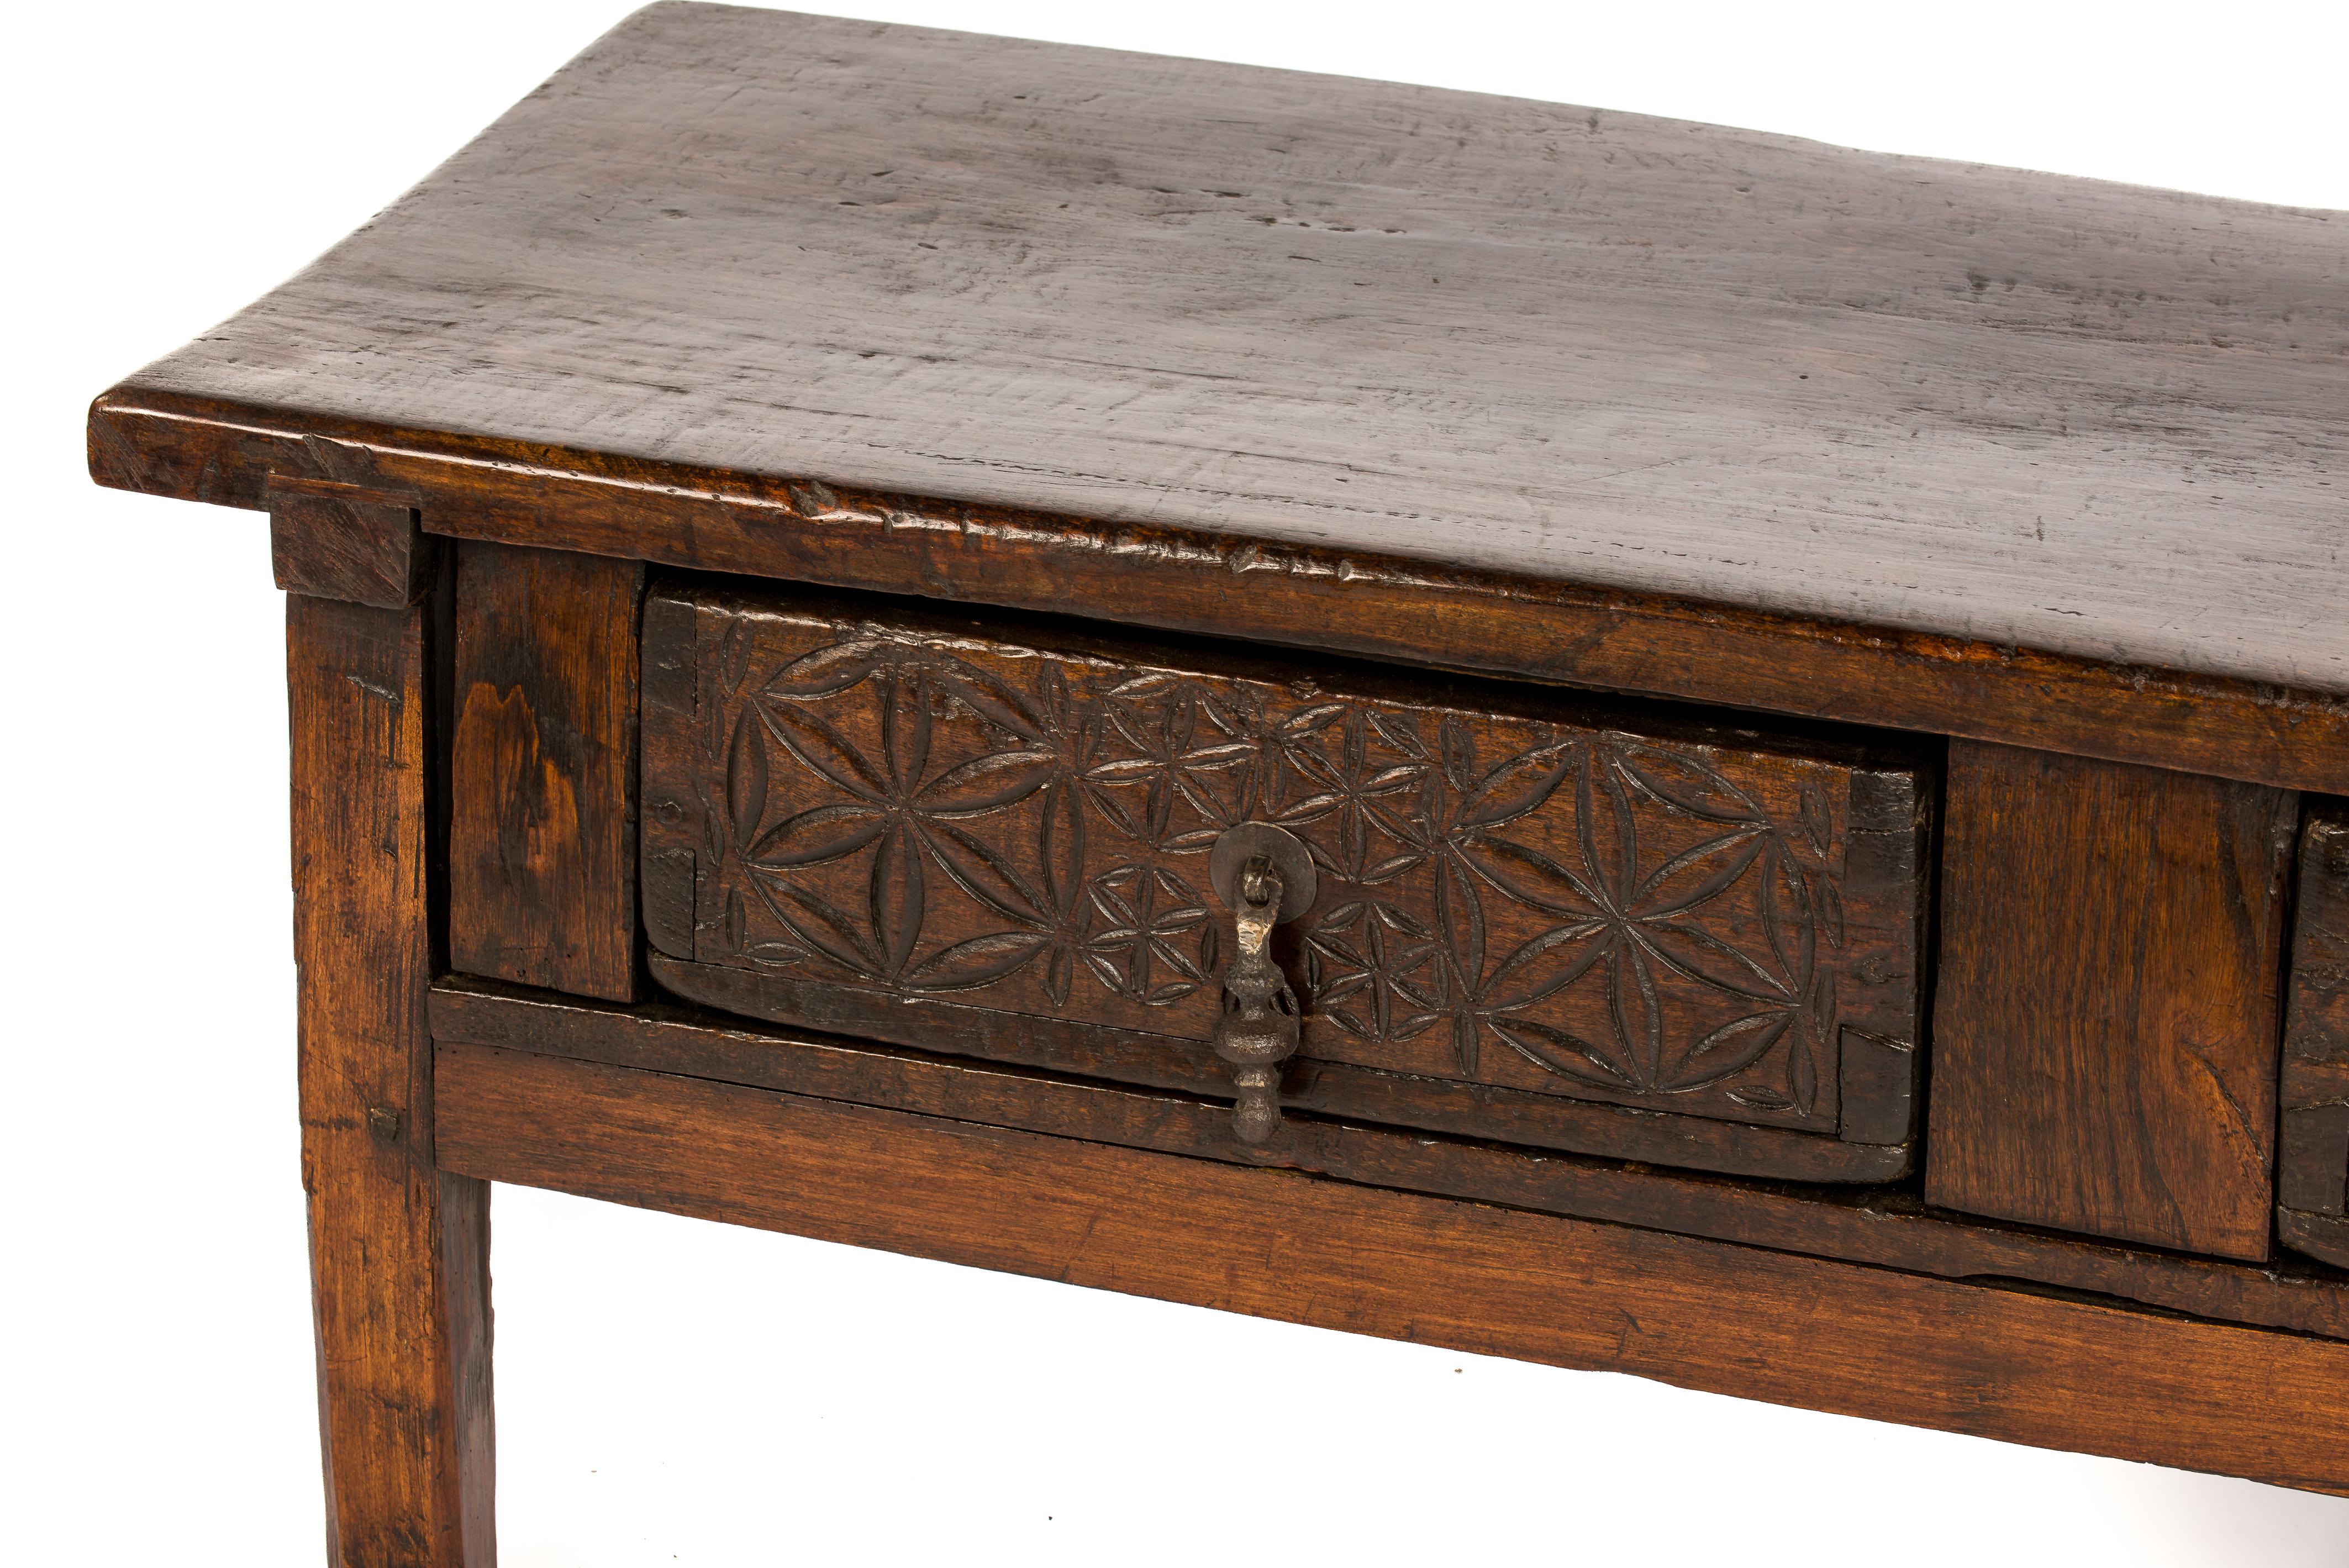 Baroque Antique 18th-Century Rustic Spanish Chestnut Coffee Table with Geometric Carving